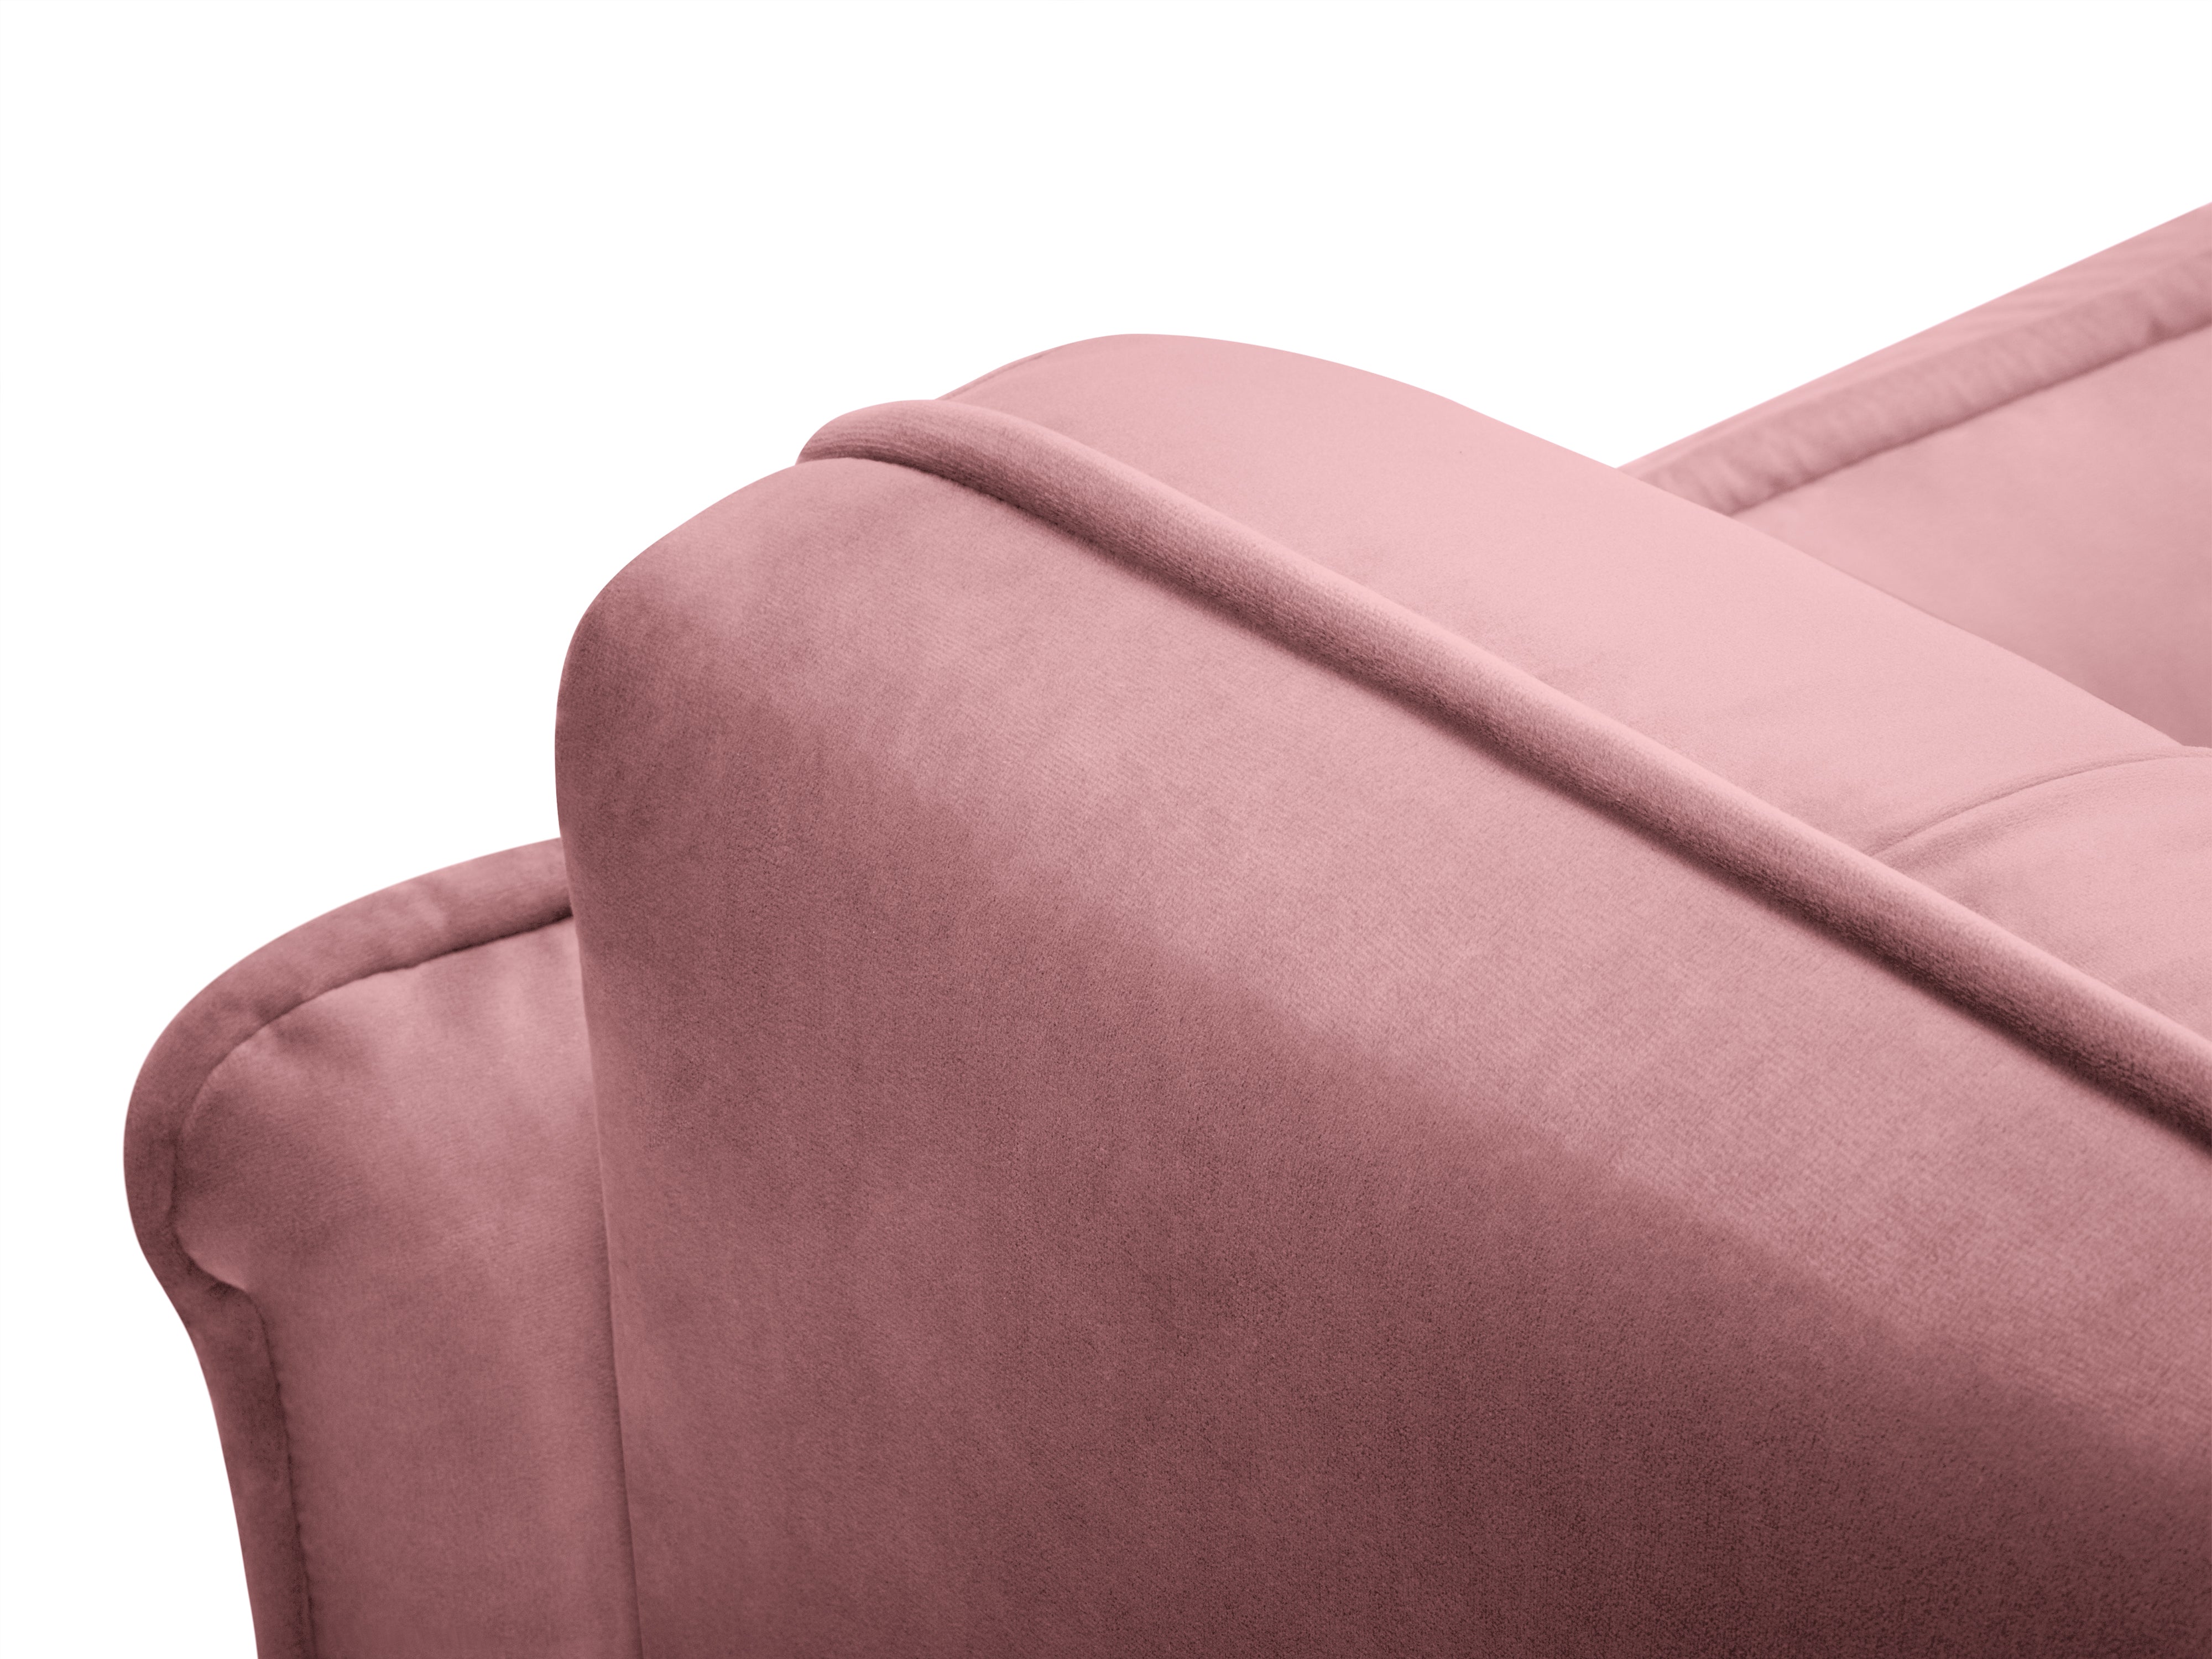 armchair with pink